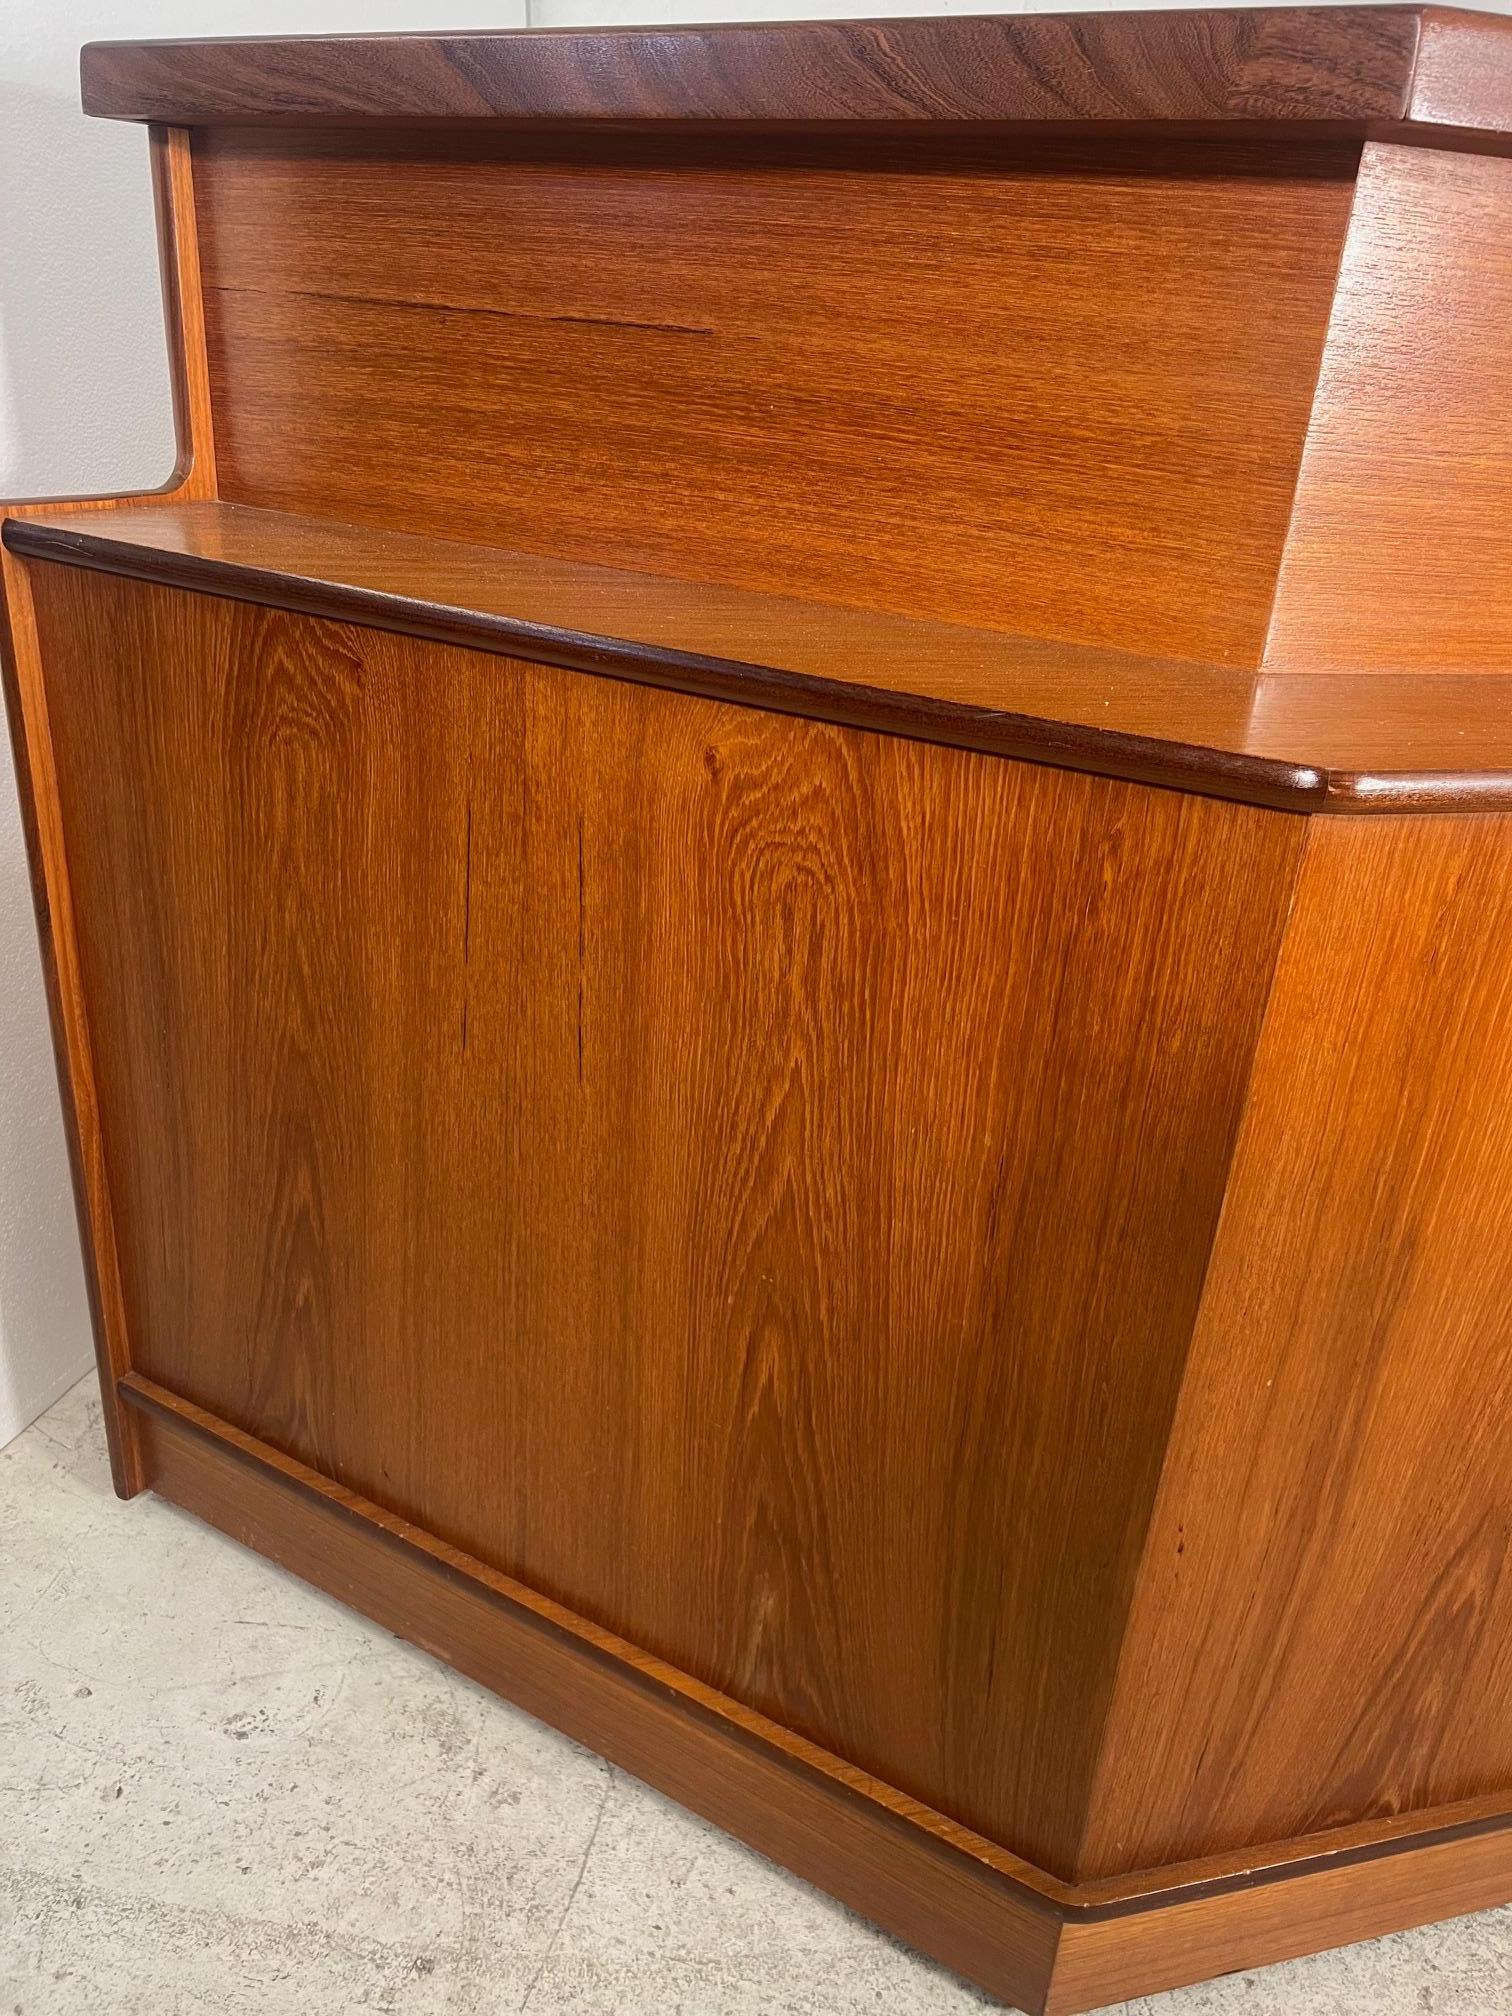 This is an amazing 1970's teak veneer cocktail bar by Turnidge of London. Made in England.

Features side panel that can be attached to the left or right. There are glass doors on the side panel. There are sliding glass doors and two regular doors